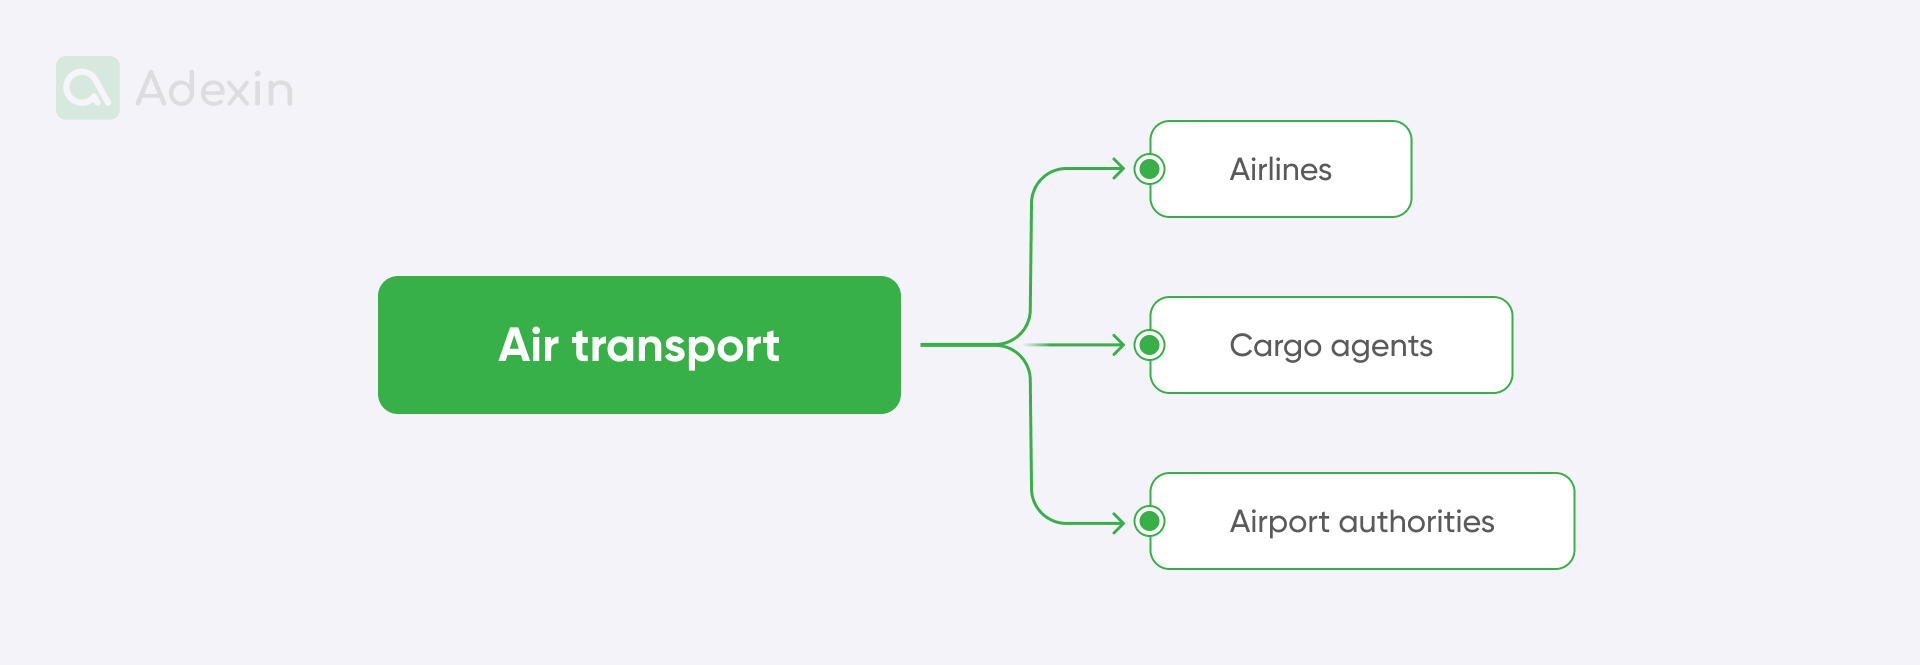 Major parties in the document flow of air transport